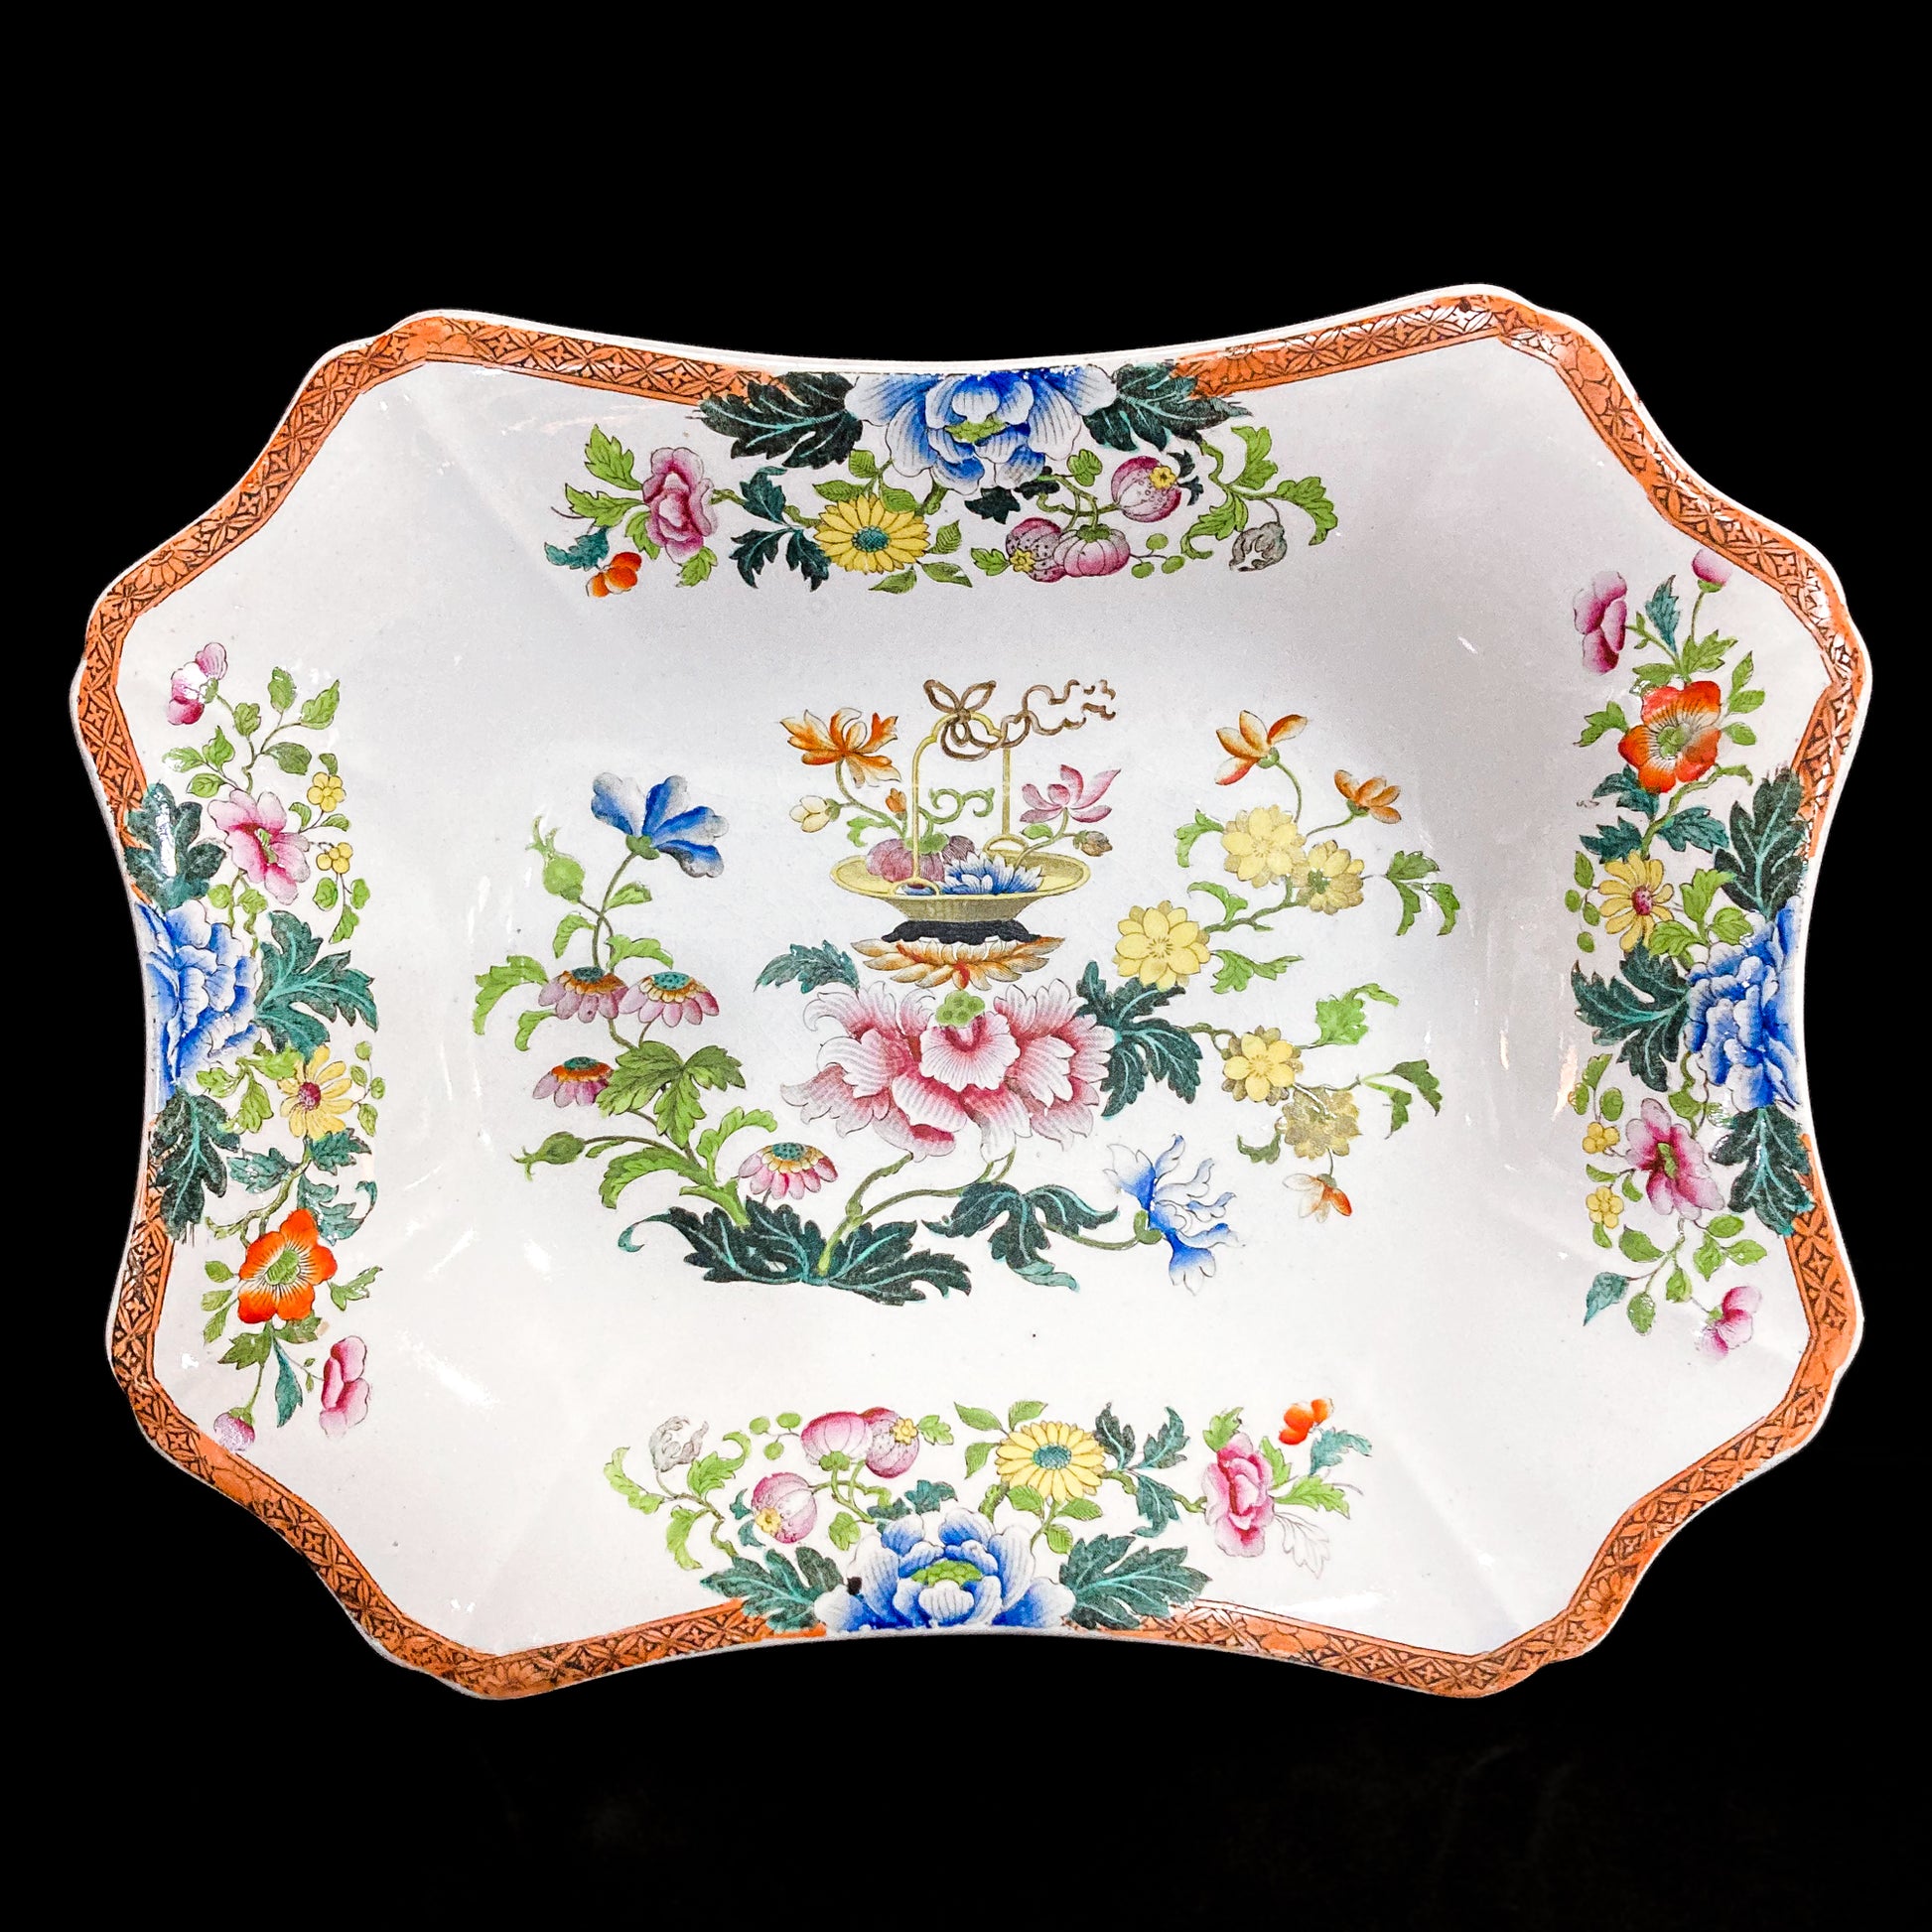 Antique 1850s Wedgwood Enameled Multicolor Floral Footed Compote Dish Top Pattern